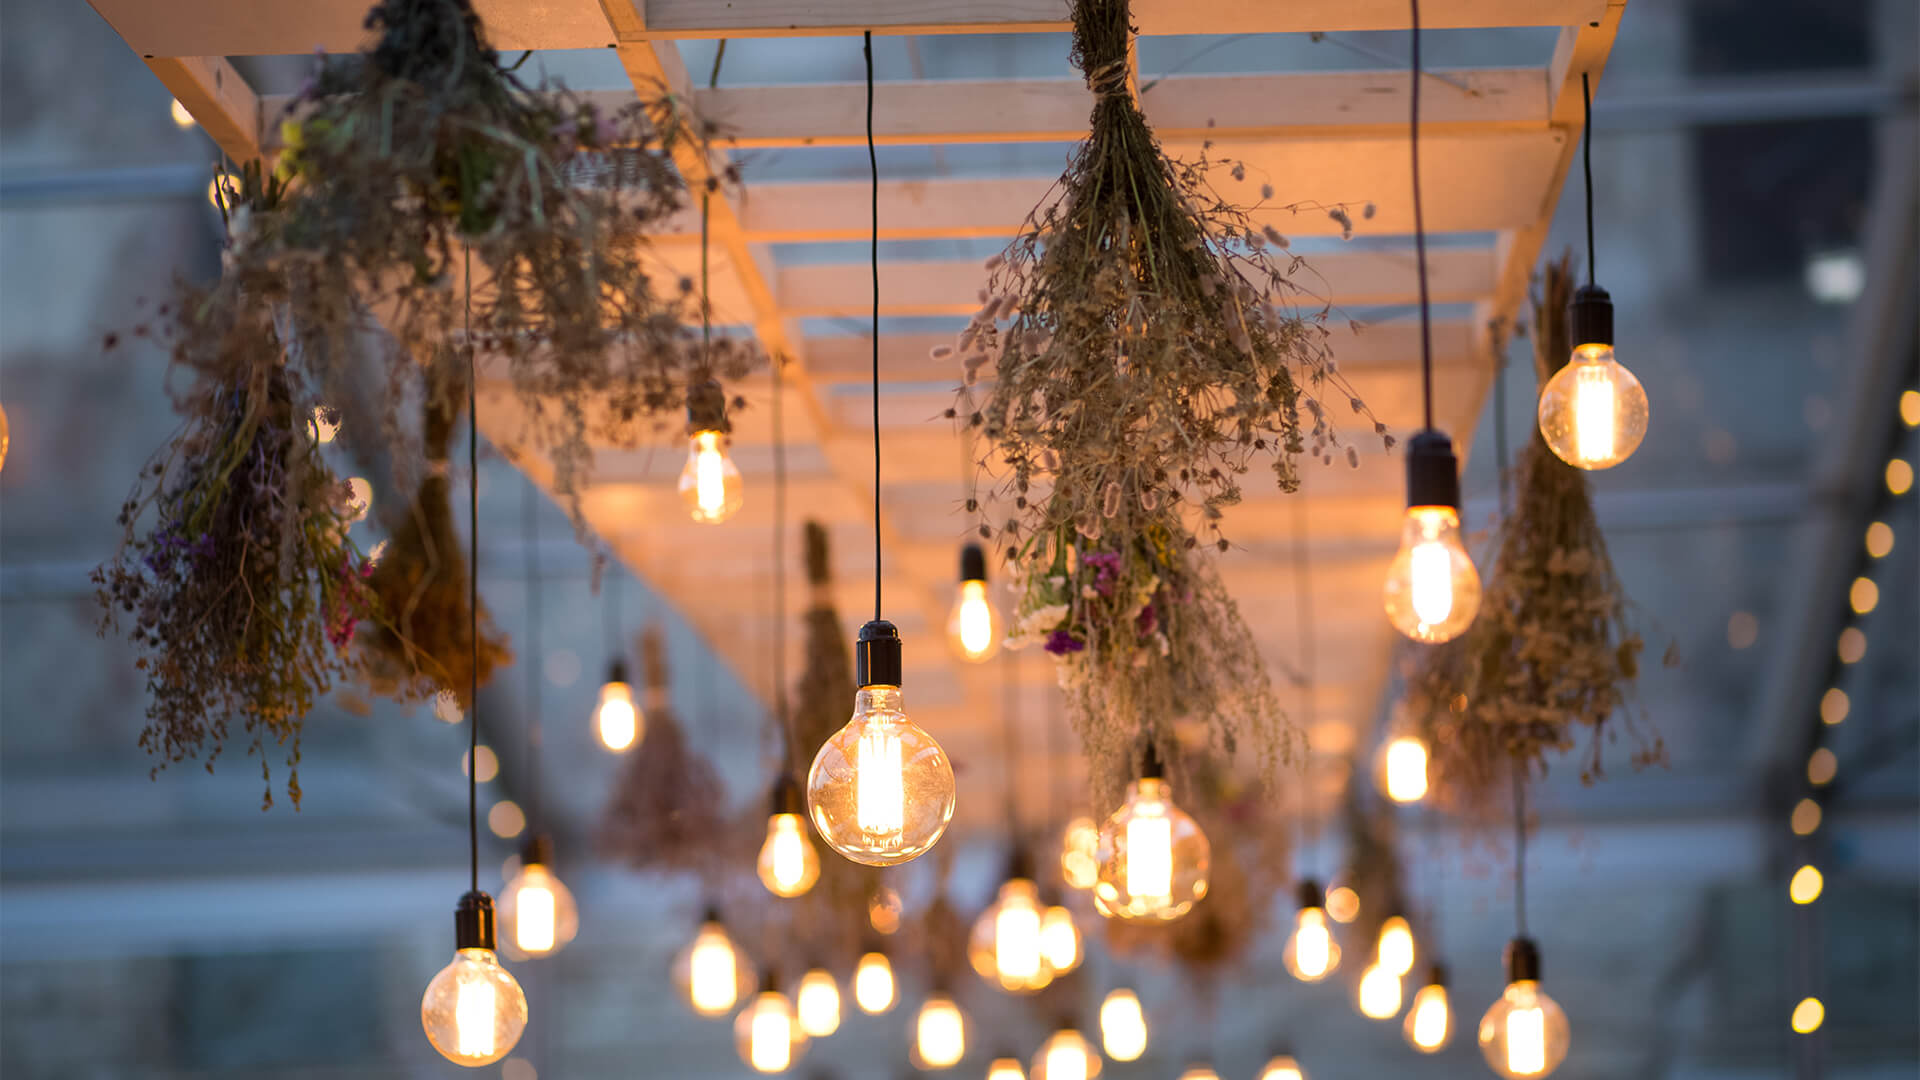 Dried flowers and hanging lights